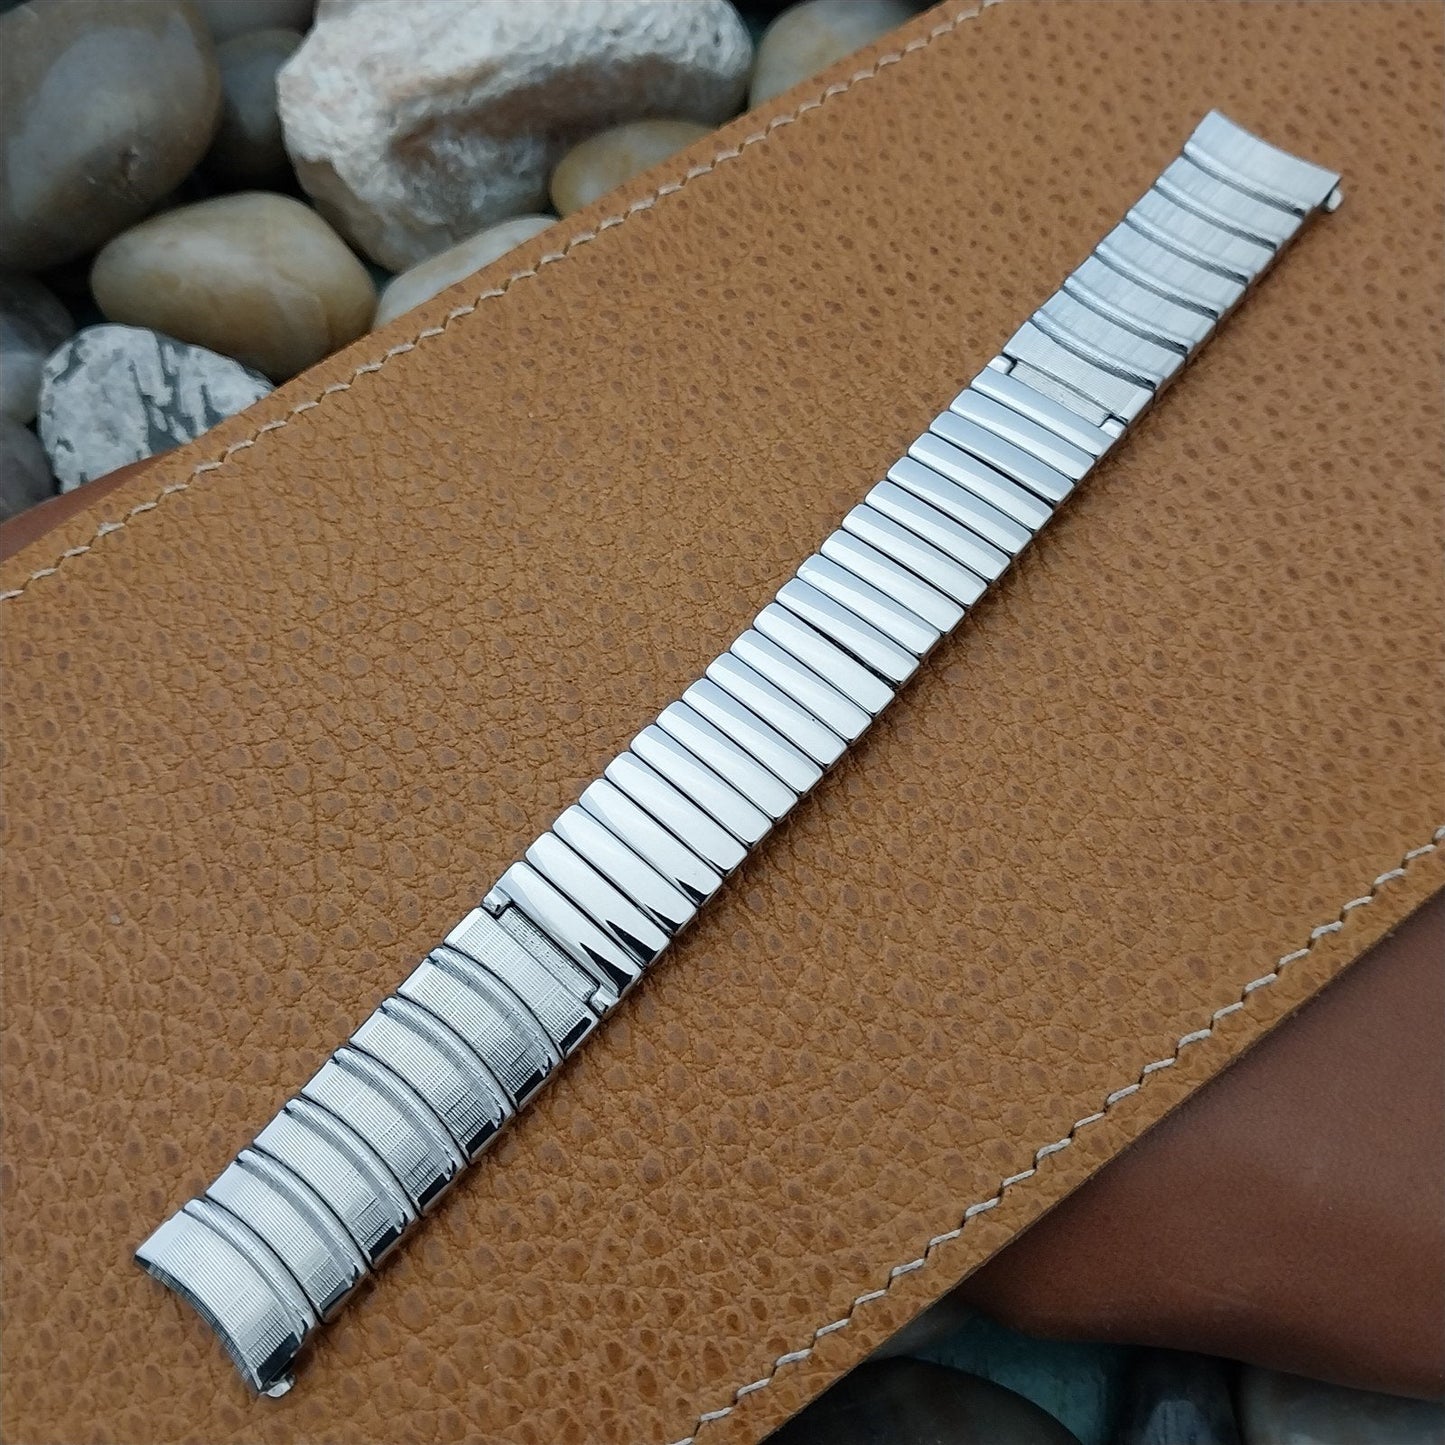 Vintage 5/8" JB Champion MCM Unused Stainless Steel Classic 1960s Watch Band